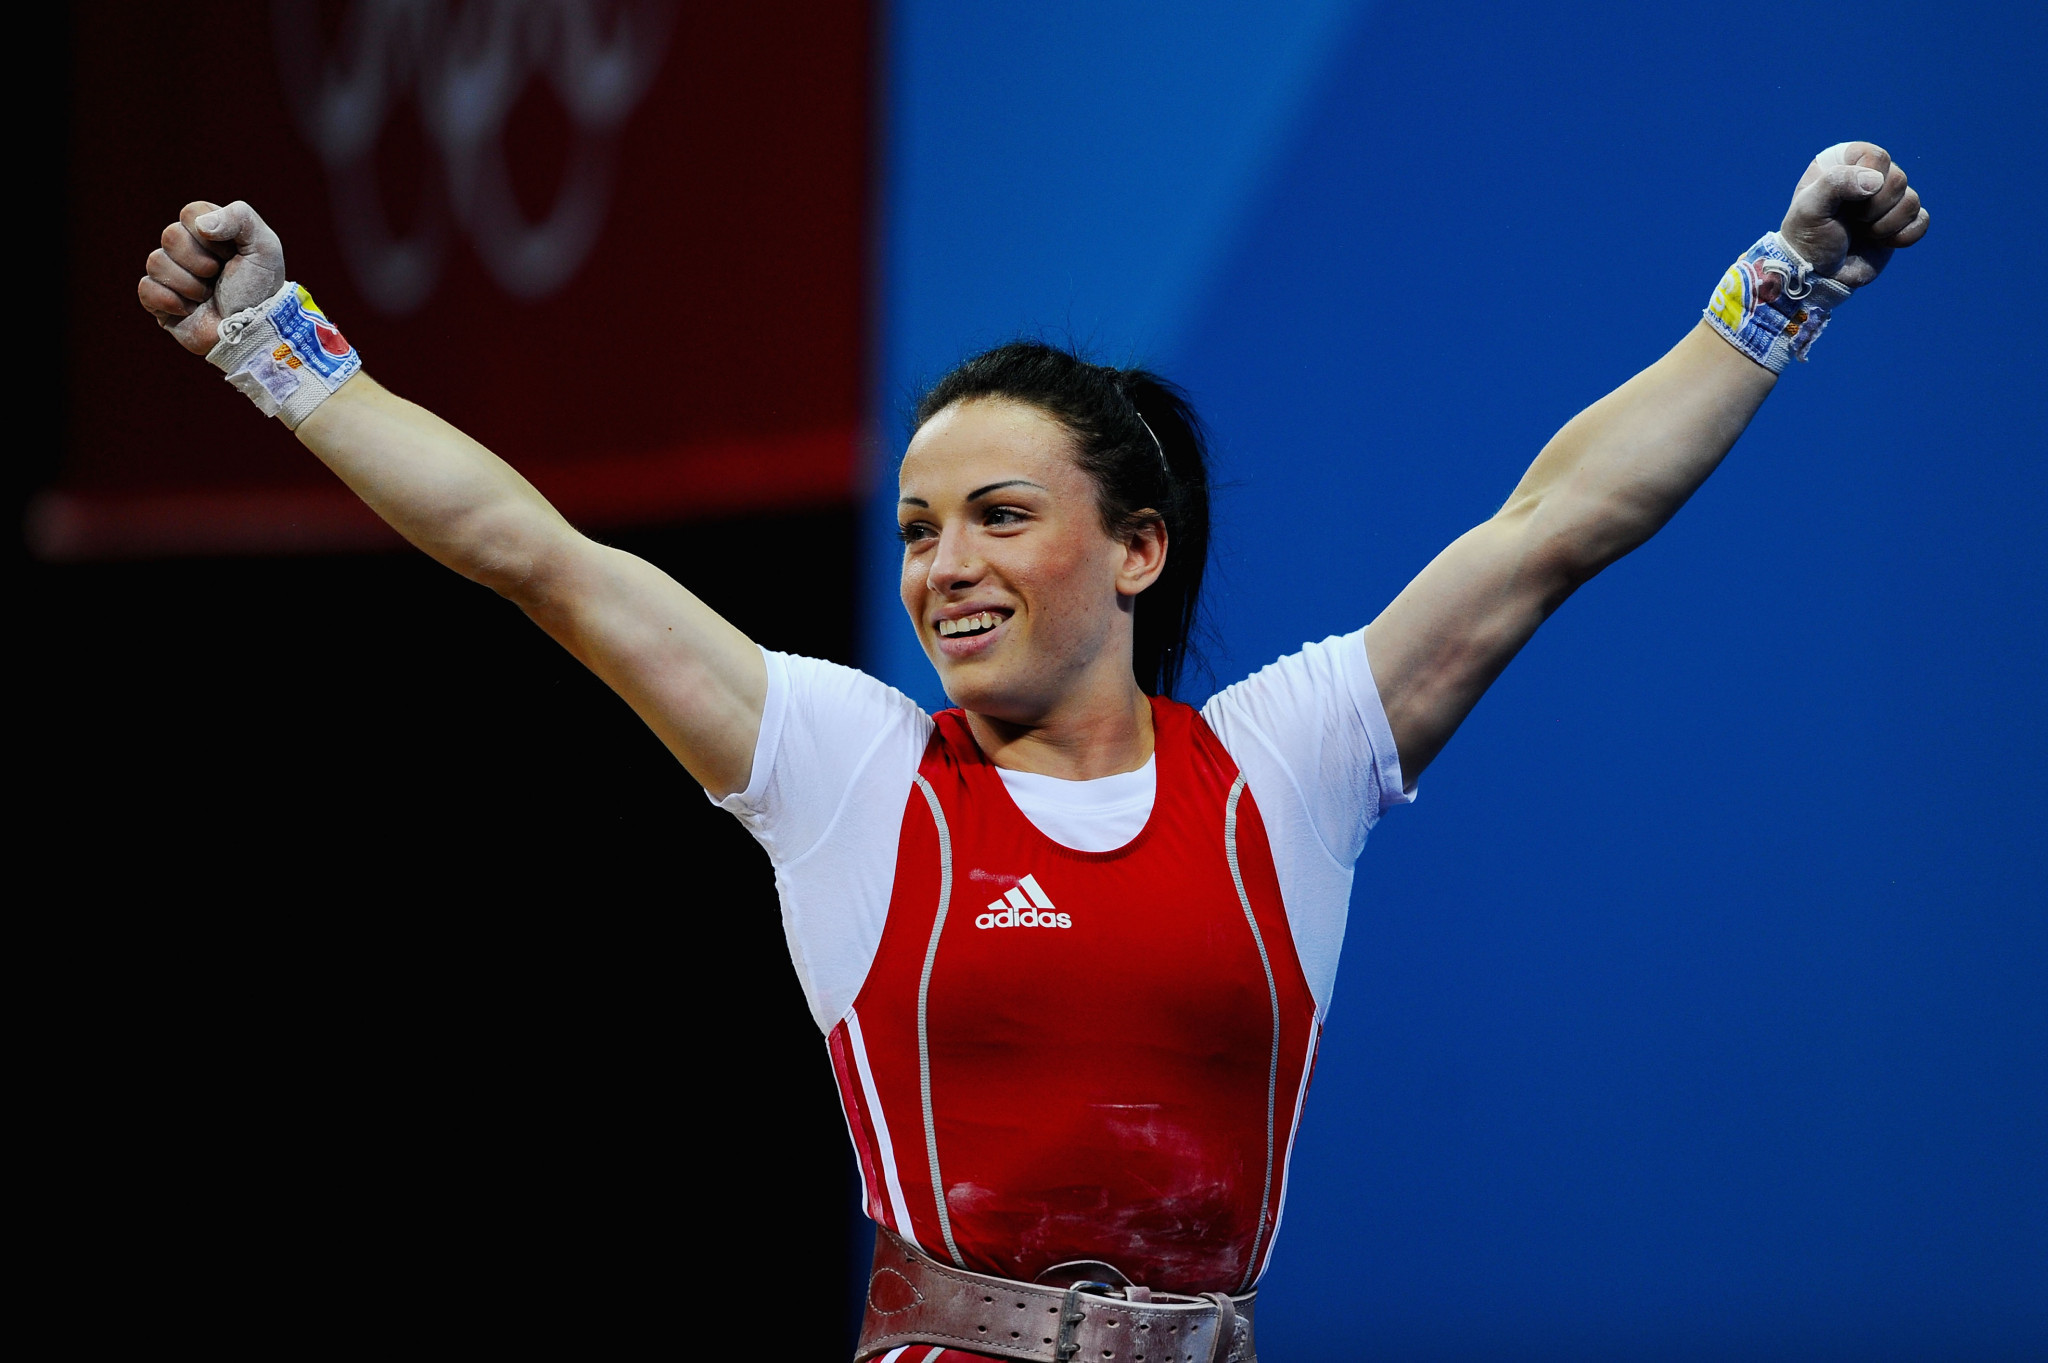 Moldovan weightlifter Cristina Iovu was stripped of her London 2012 Olympic medal when stored samples were retested ©Getty Images